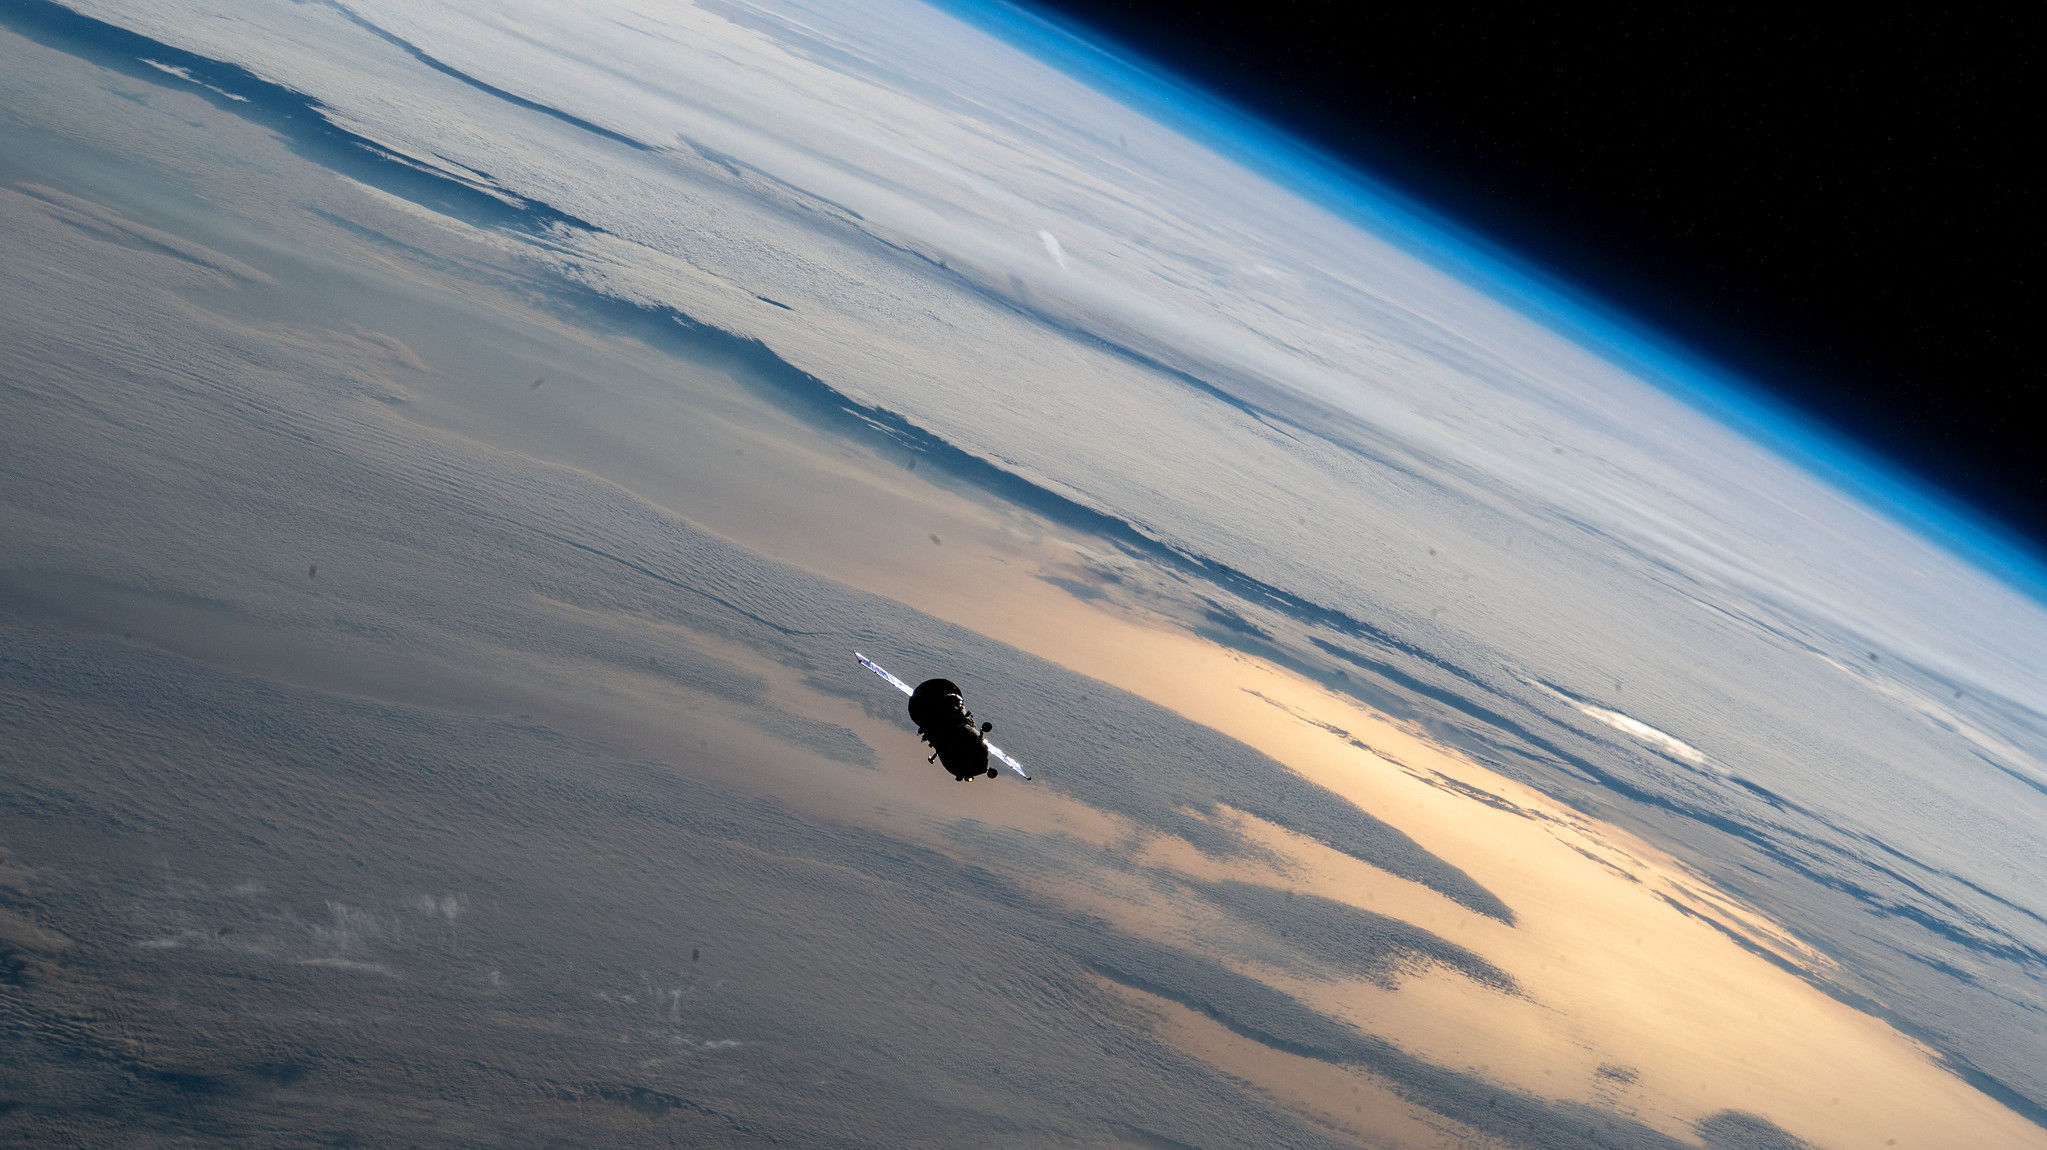 The ISS Progress 79 resupply ship from Roscosmos is pictured 261 miles above the Pacific Ocean after undocking from the Zvezda service module's rear port and departing the vicinity the International Space Station.